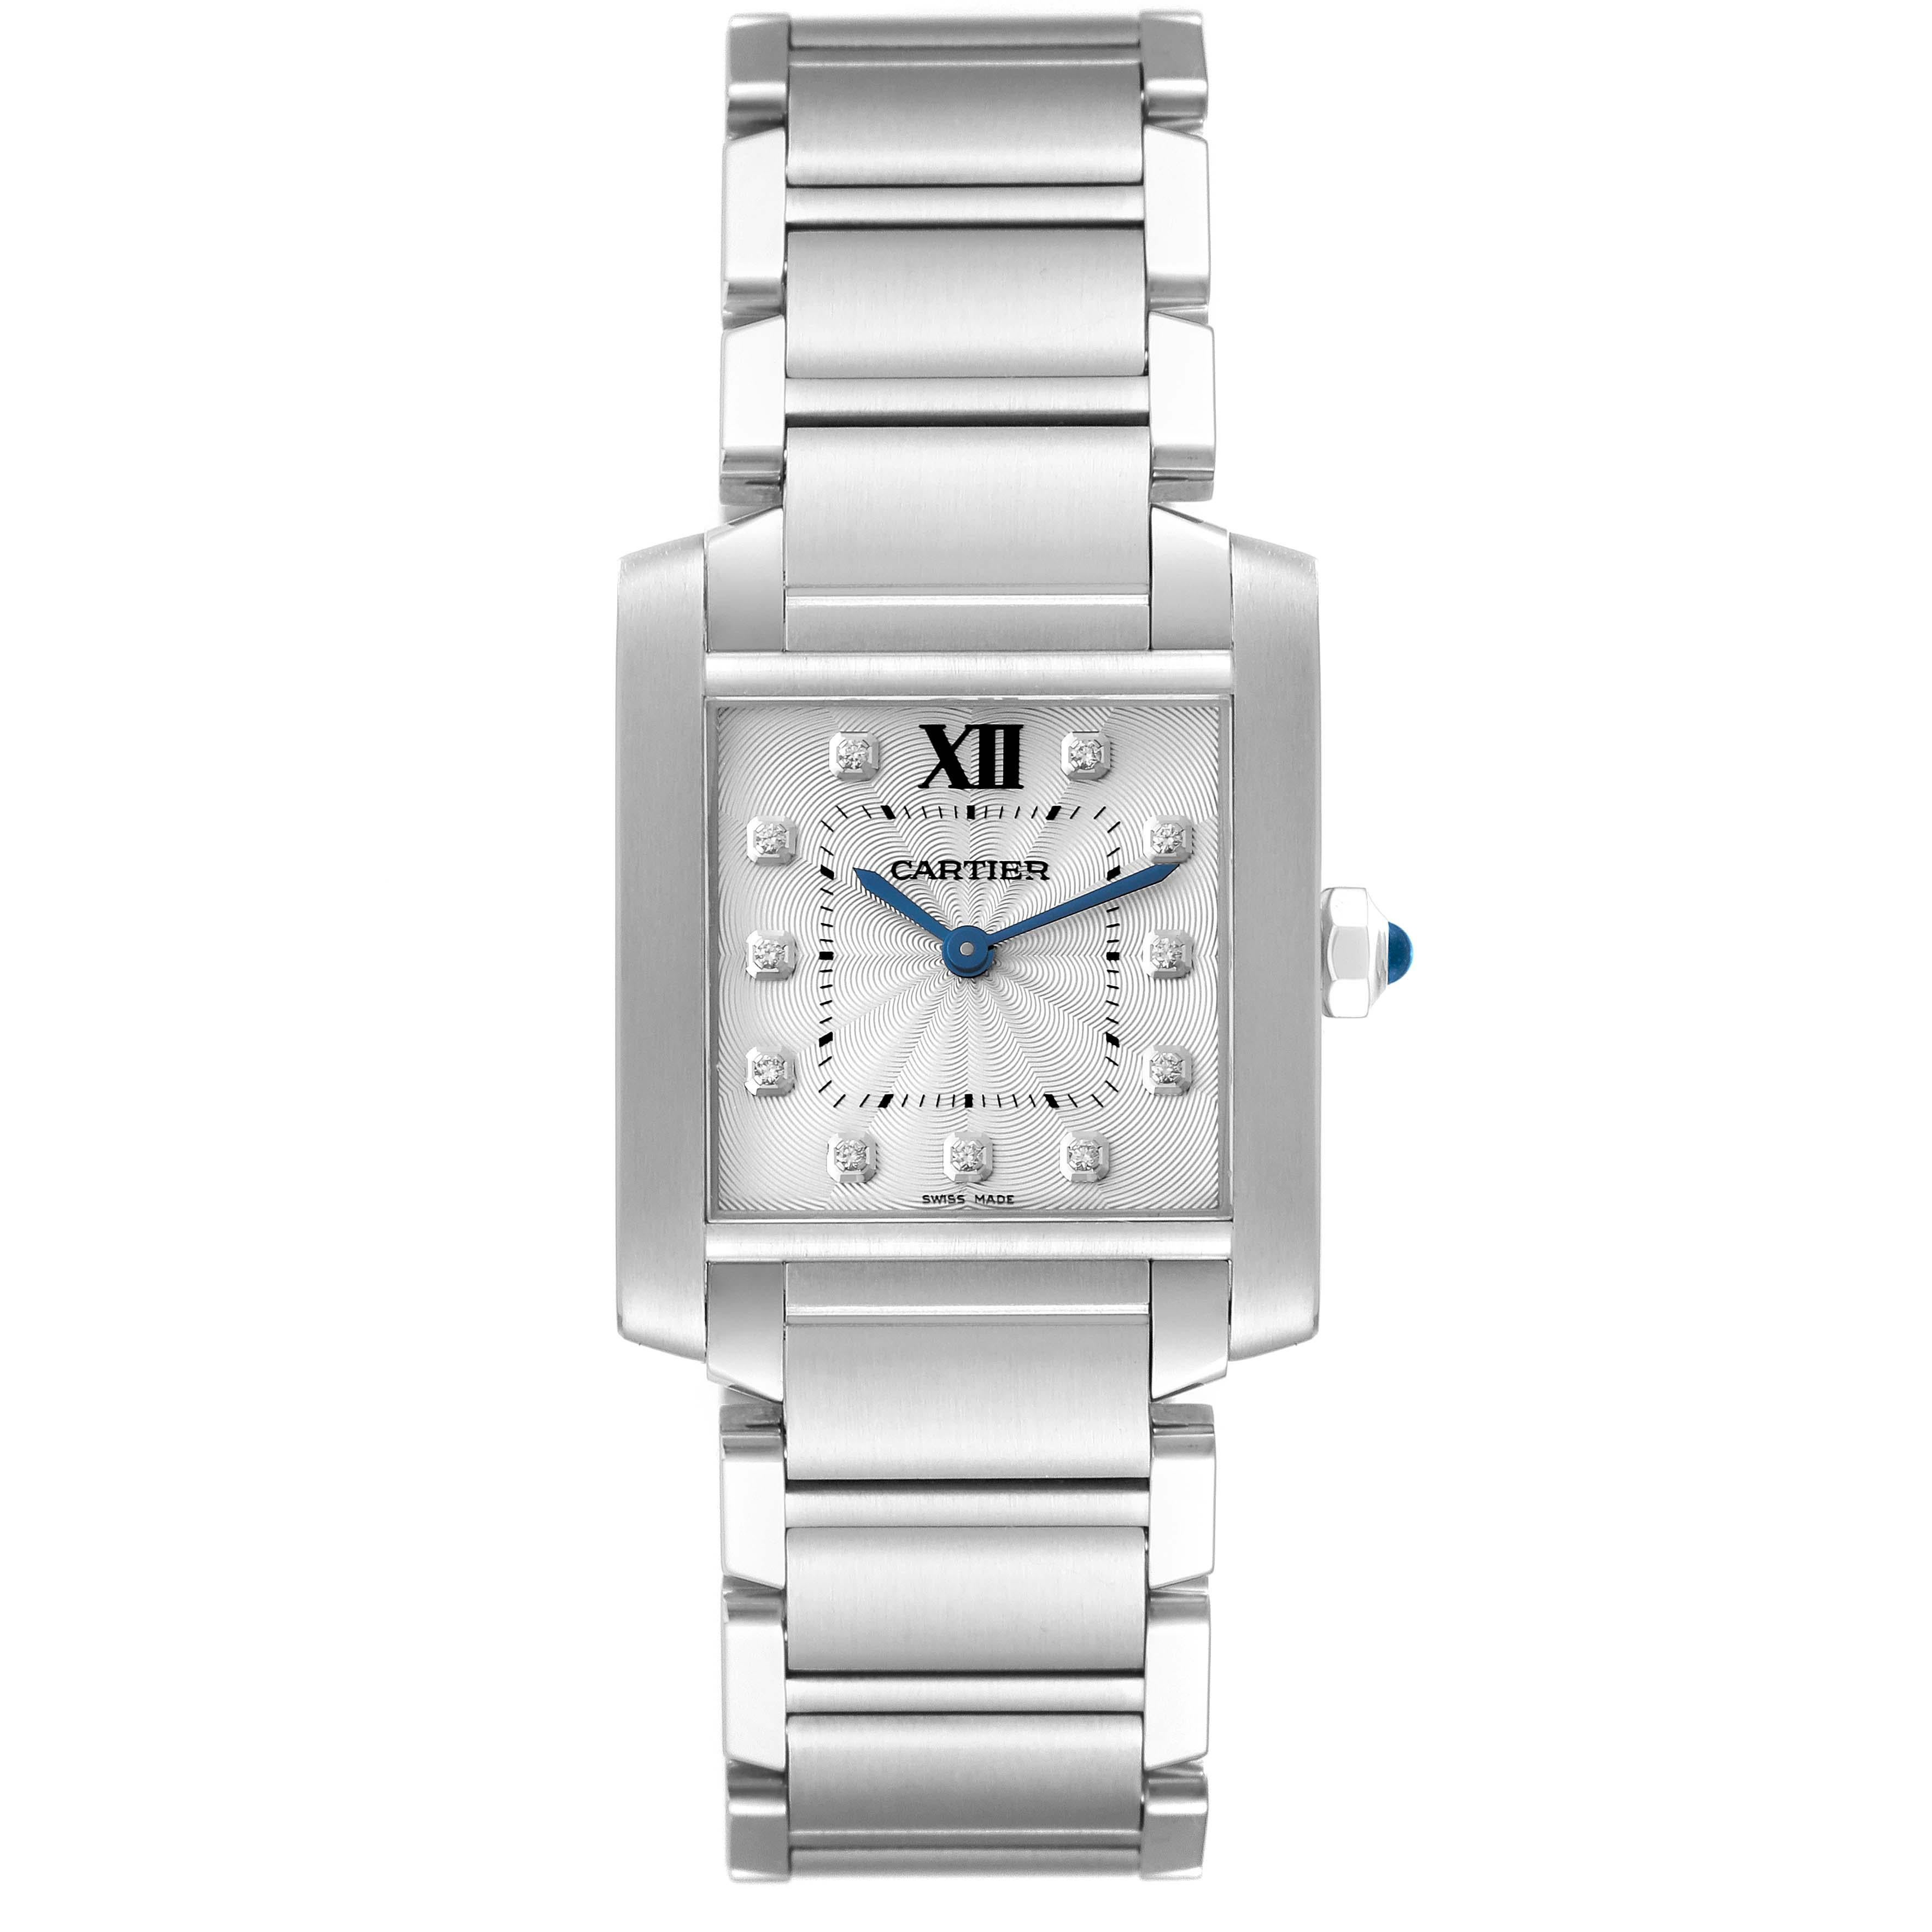 Cartier Tank Francaise Midsize Diamond Steel Ladies Watch WE110007. Quartz movement. Rectangular stainless steel 25.0 X 30.0 mm case. Octagonal crown set with a blue spinel cabochon. . Scratch resistant sapphire crystal. Silver guilloche dial with